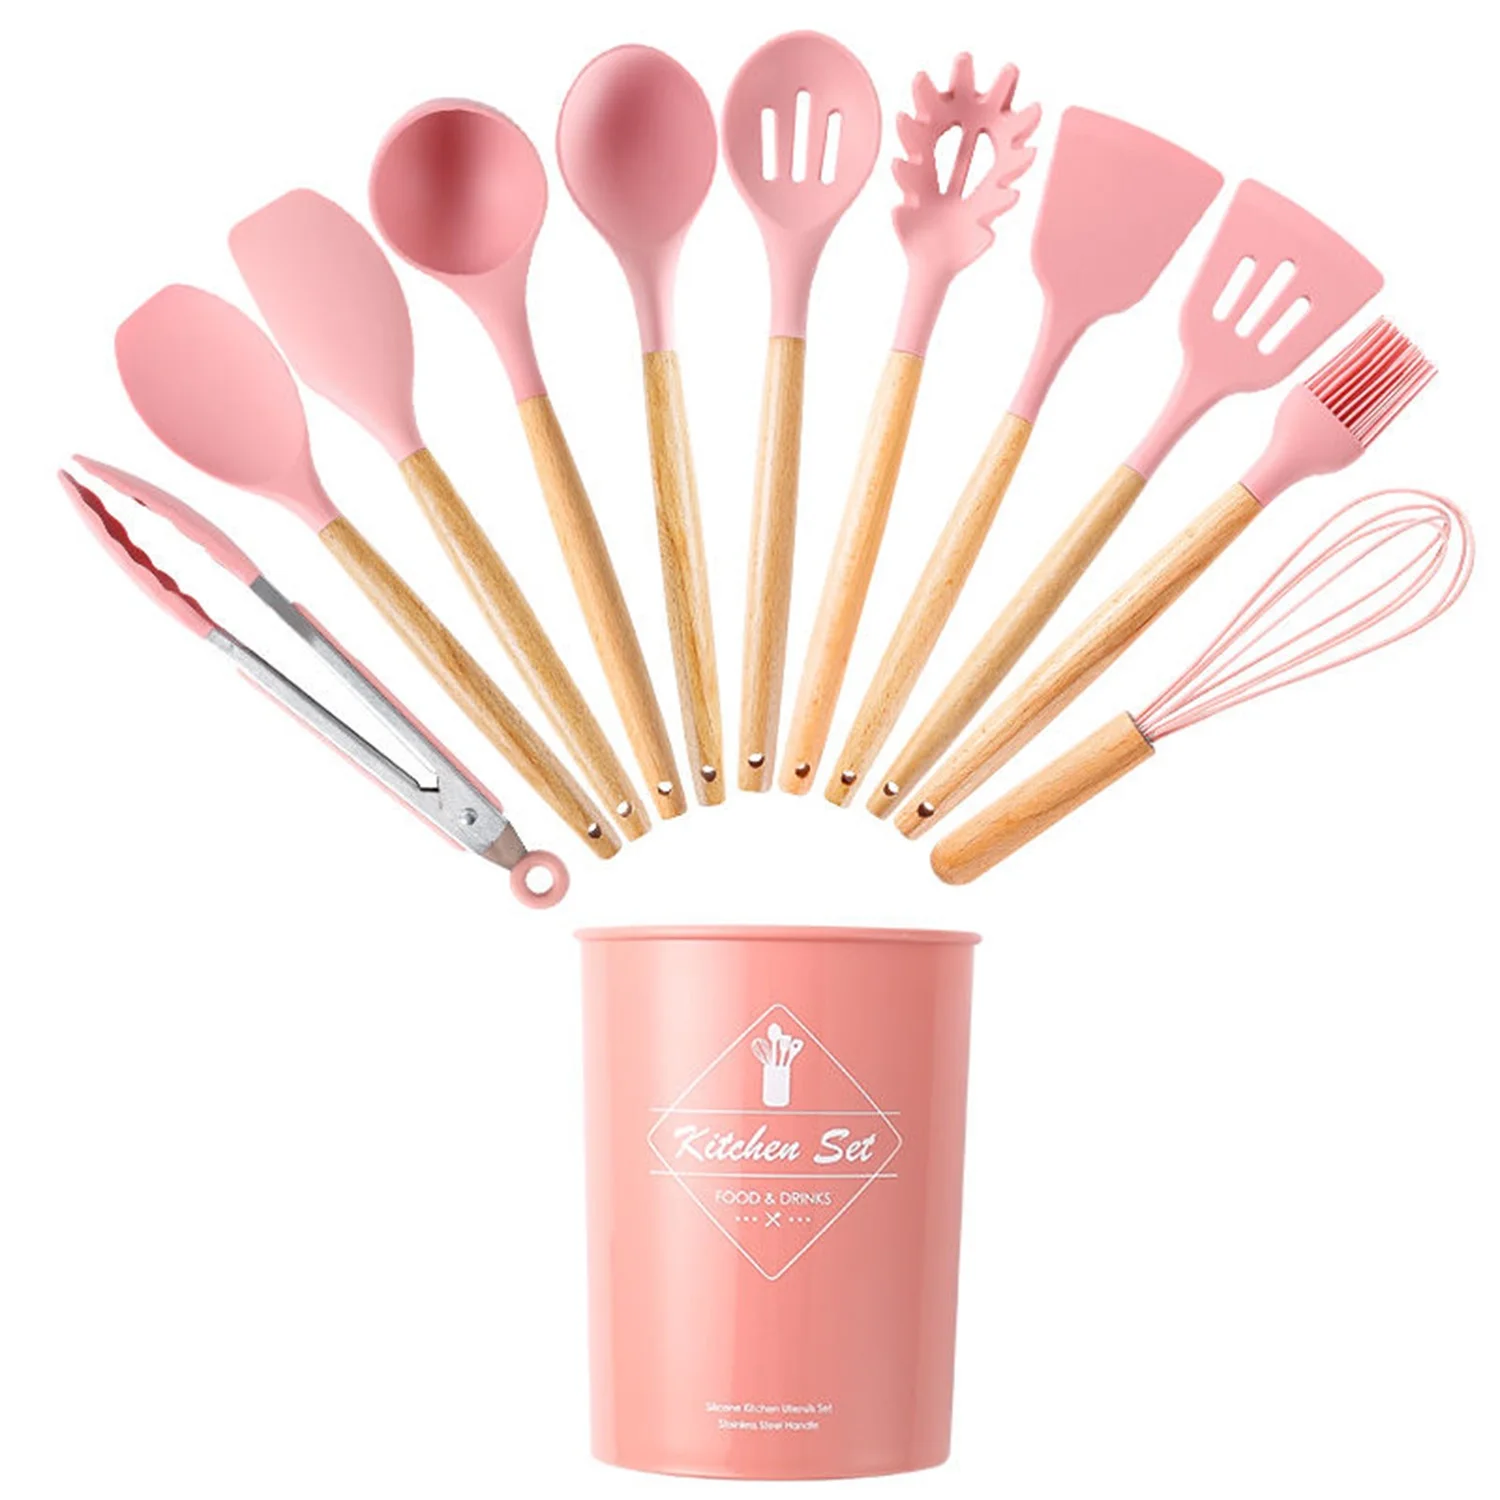 Schnesland Silicone Kitchen Tools Set with Spatula Turner Spoon Egg Whisk